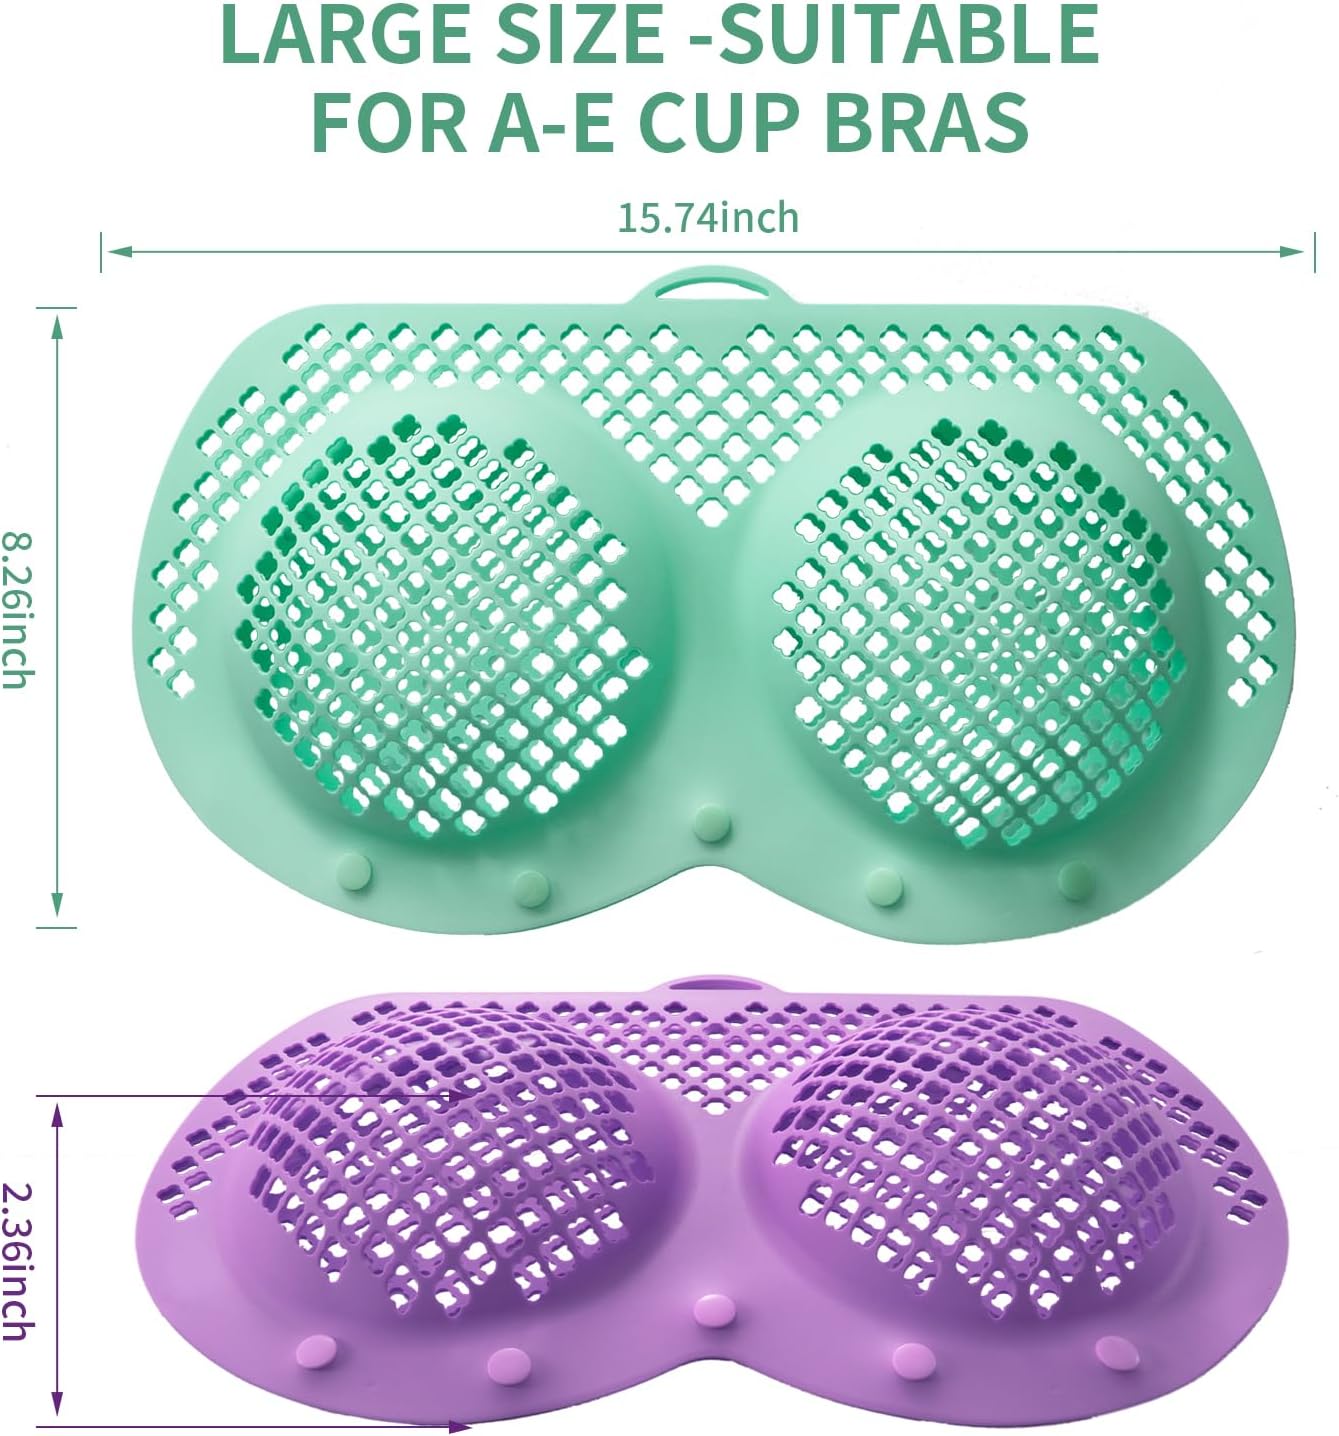 Bra Washing Bag for Laundry, Silicone Lingerie Bags for Washing Delicates,  Laundry Bag Washing Machine & Dryer Washing Bags for A-38D Cup Bras